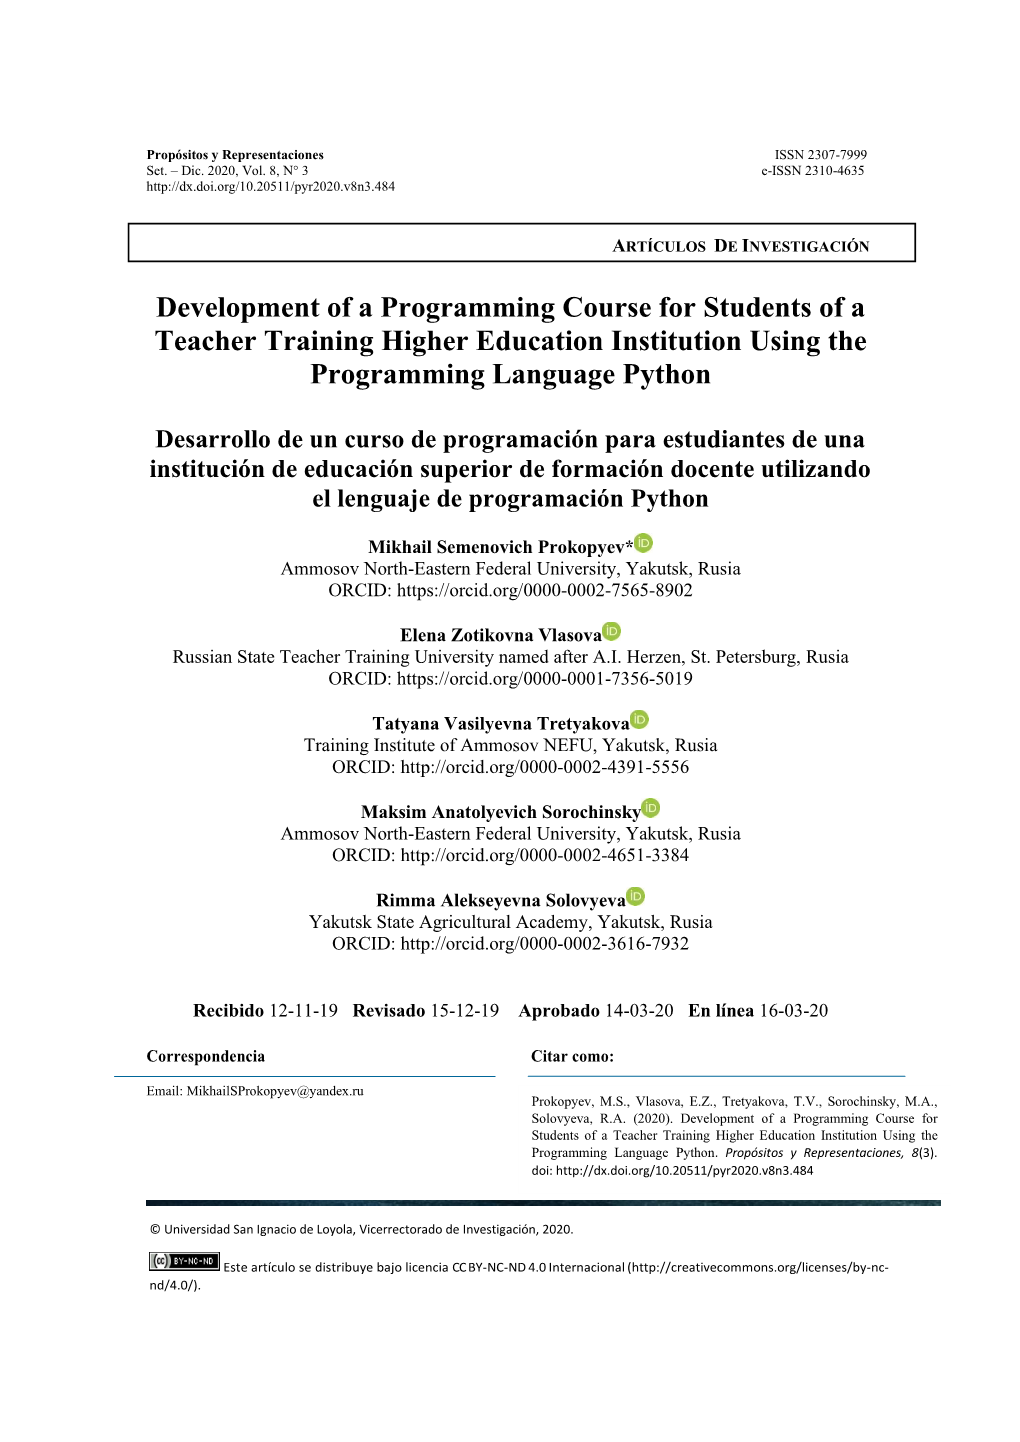 Development of a Programming Course for Students of a Teacher Training Higher Education Institution Using the Programming Language Python